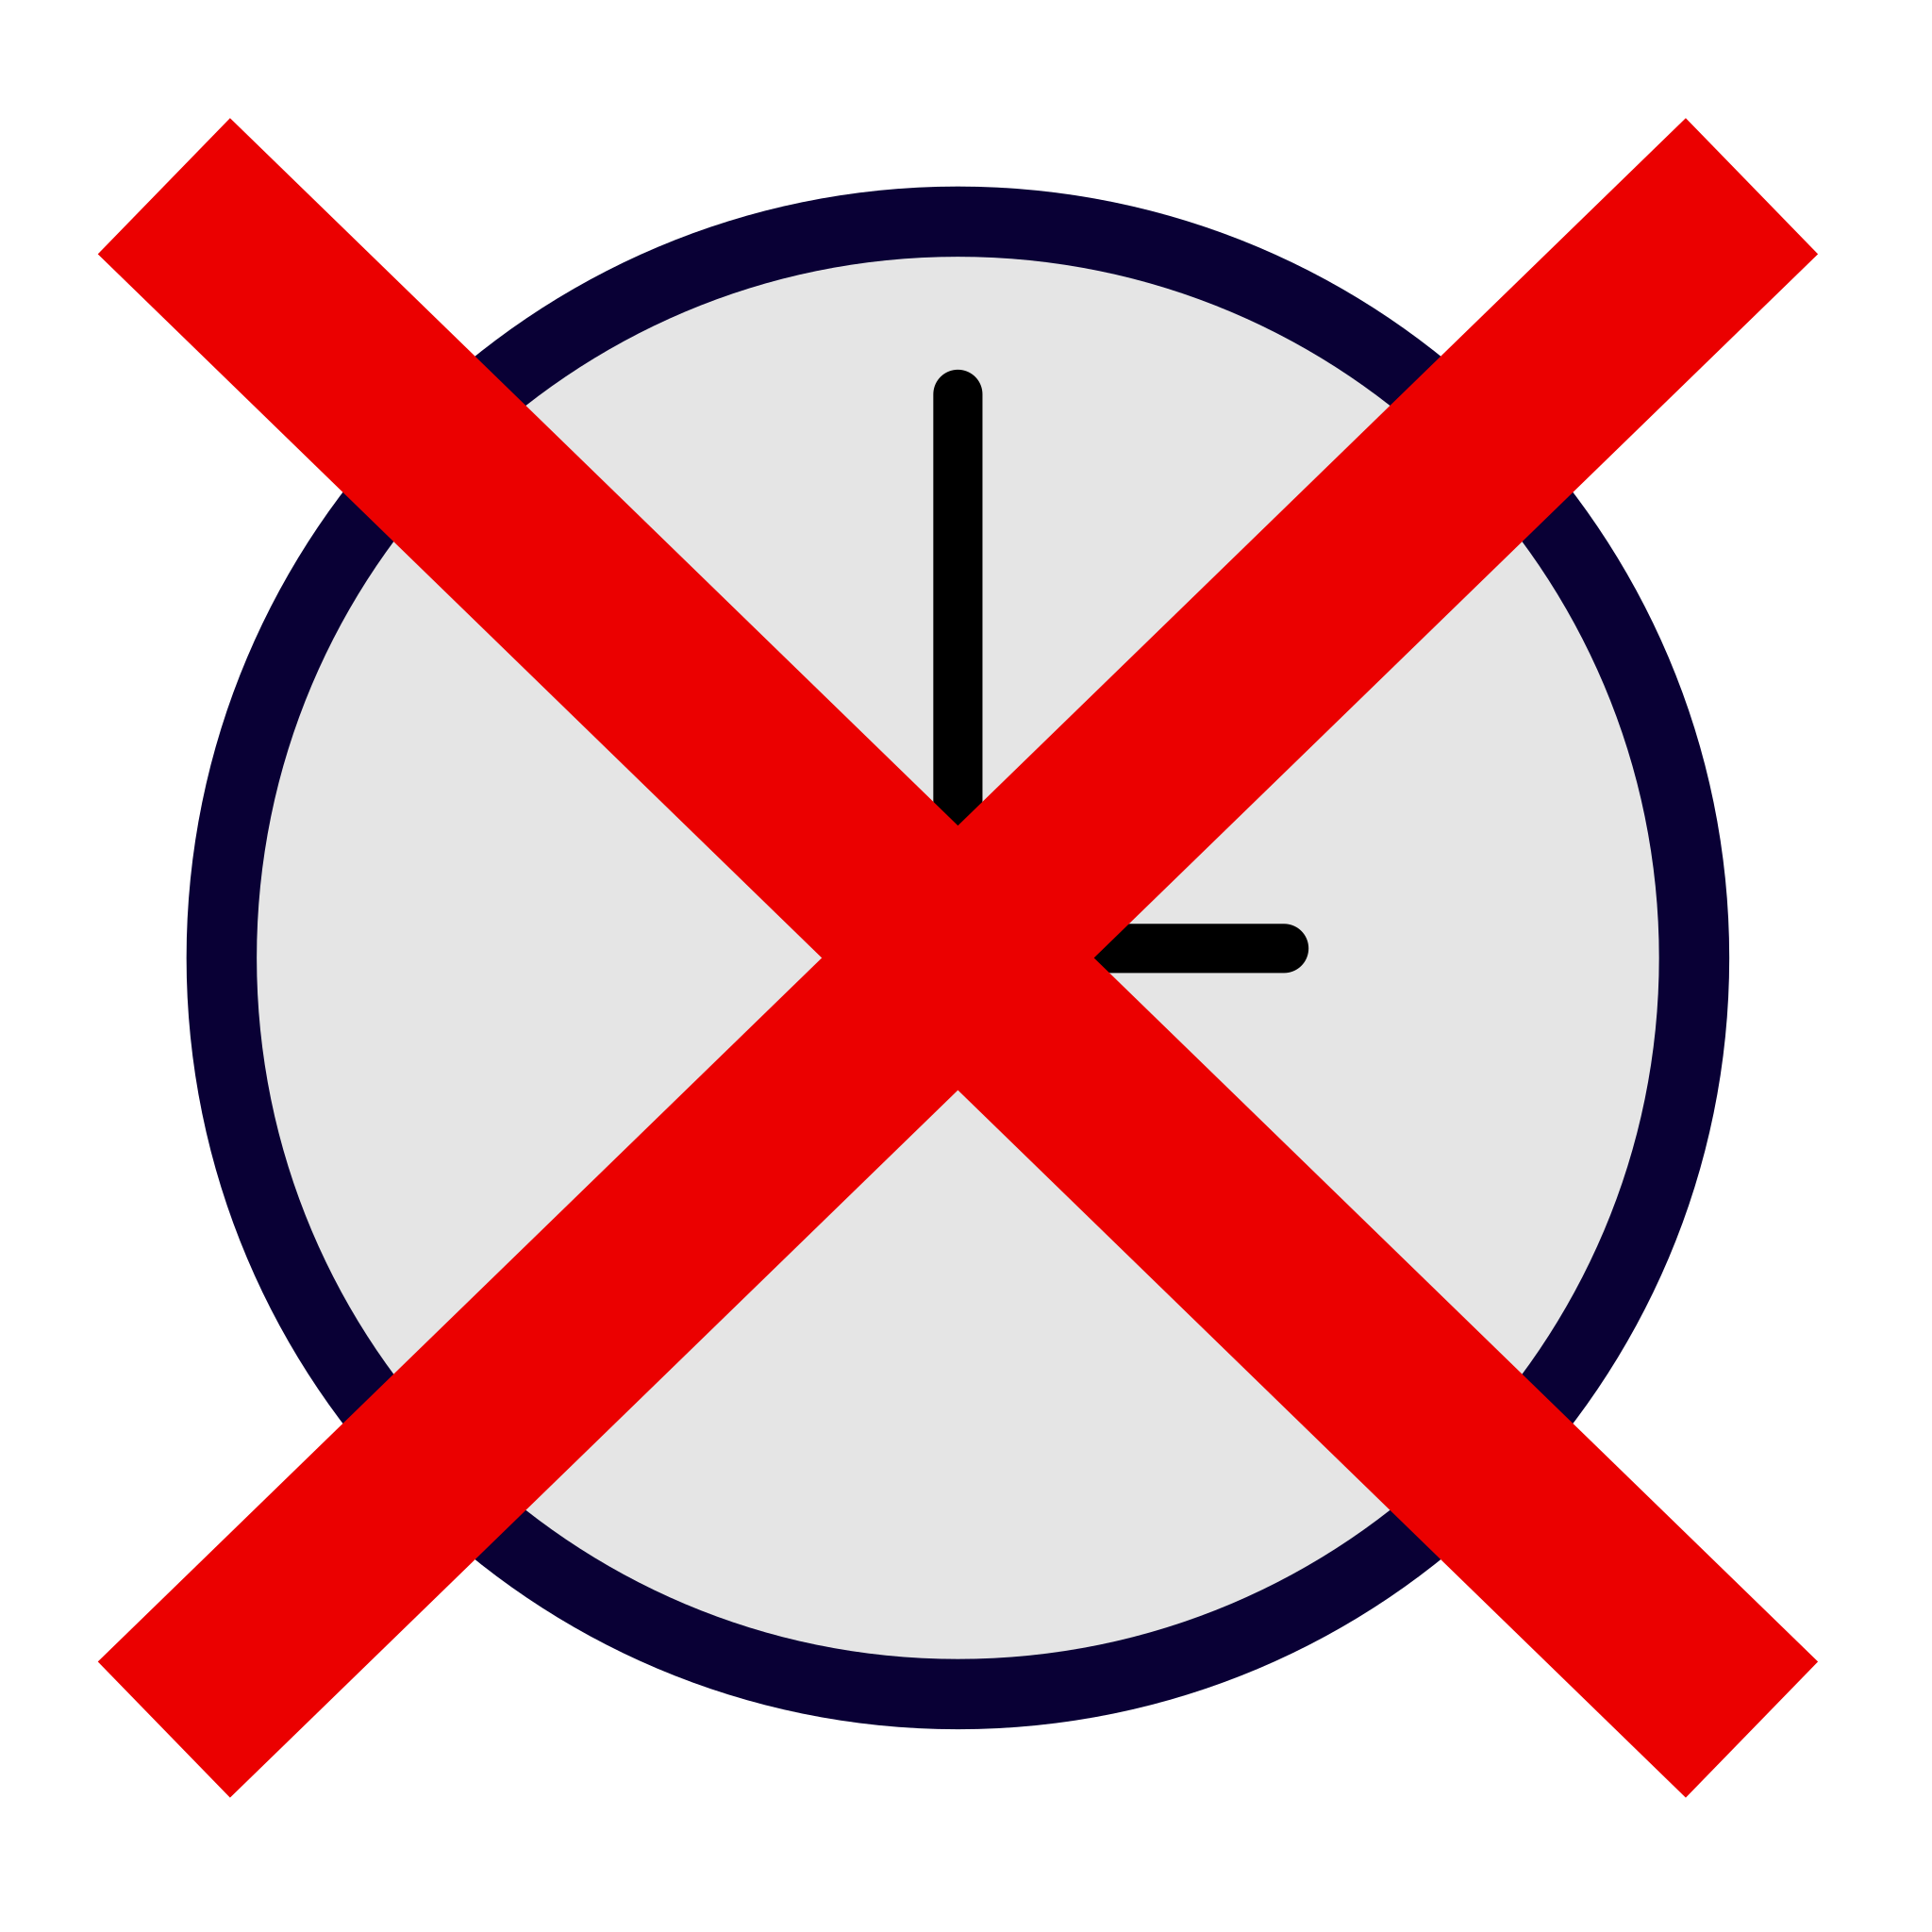 Clock icon with a red crossed-out circle